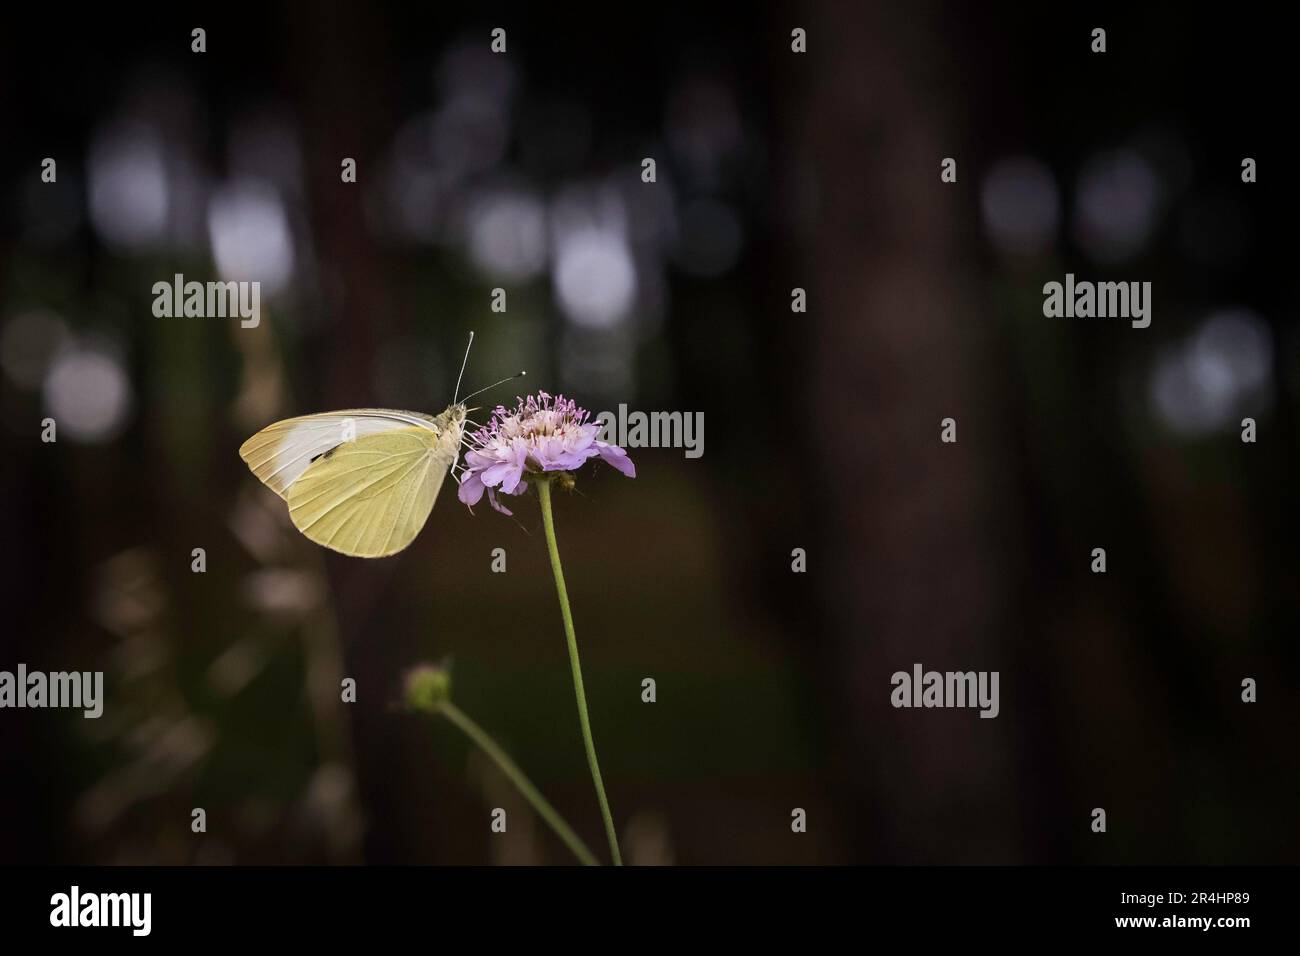 Cabbage white butterfly sitting on a flower Stock Photo